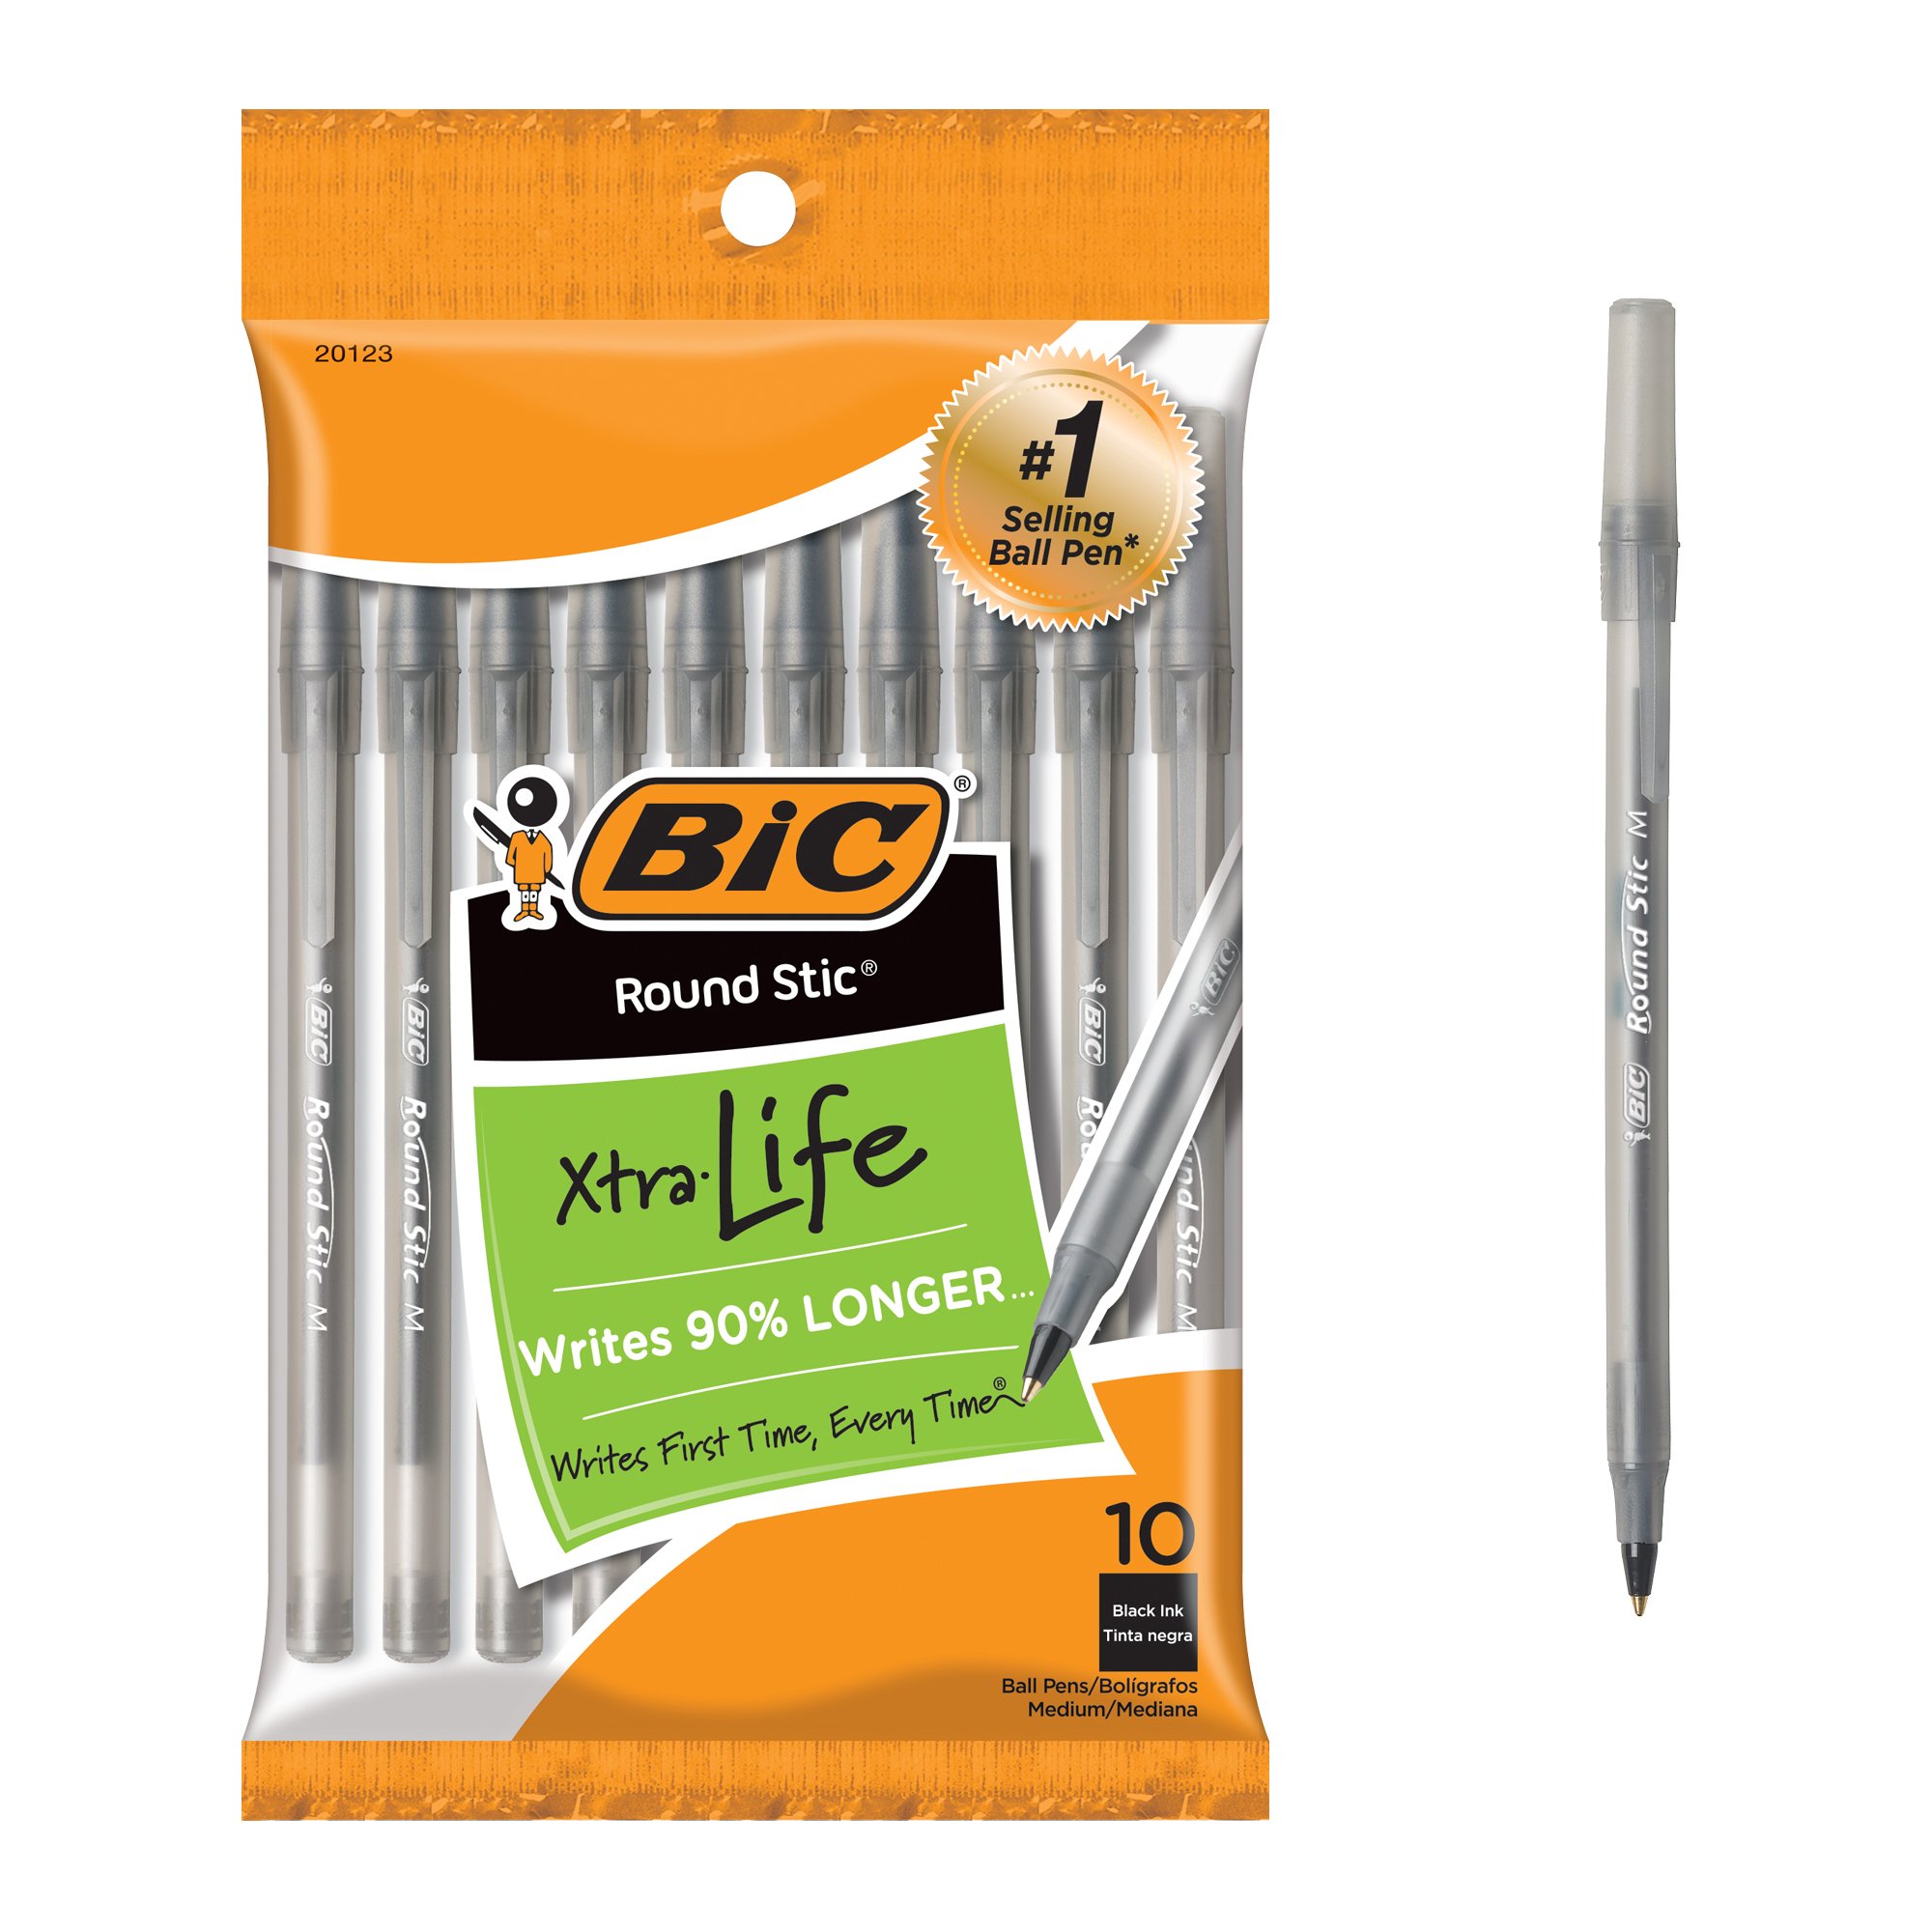 Discover the Magic of BIC Round Stic Xtra Life: Your Ultimate Writing Companion!